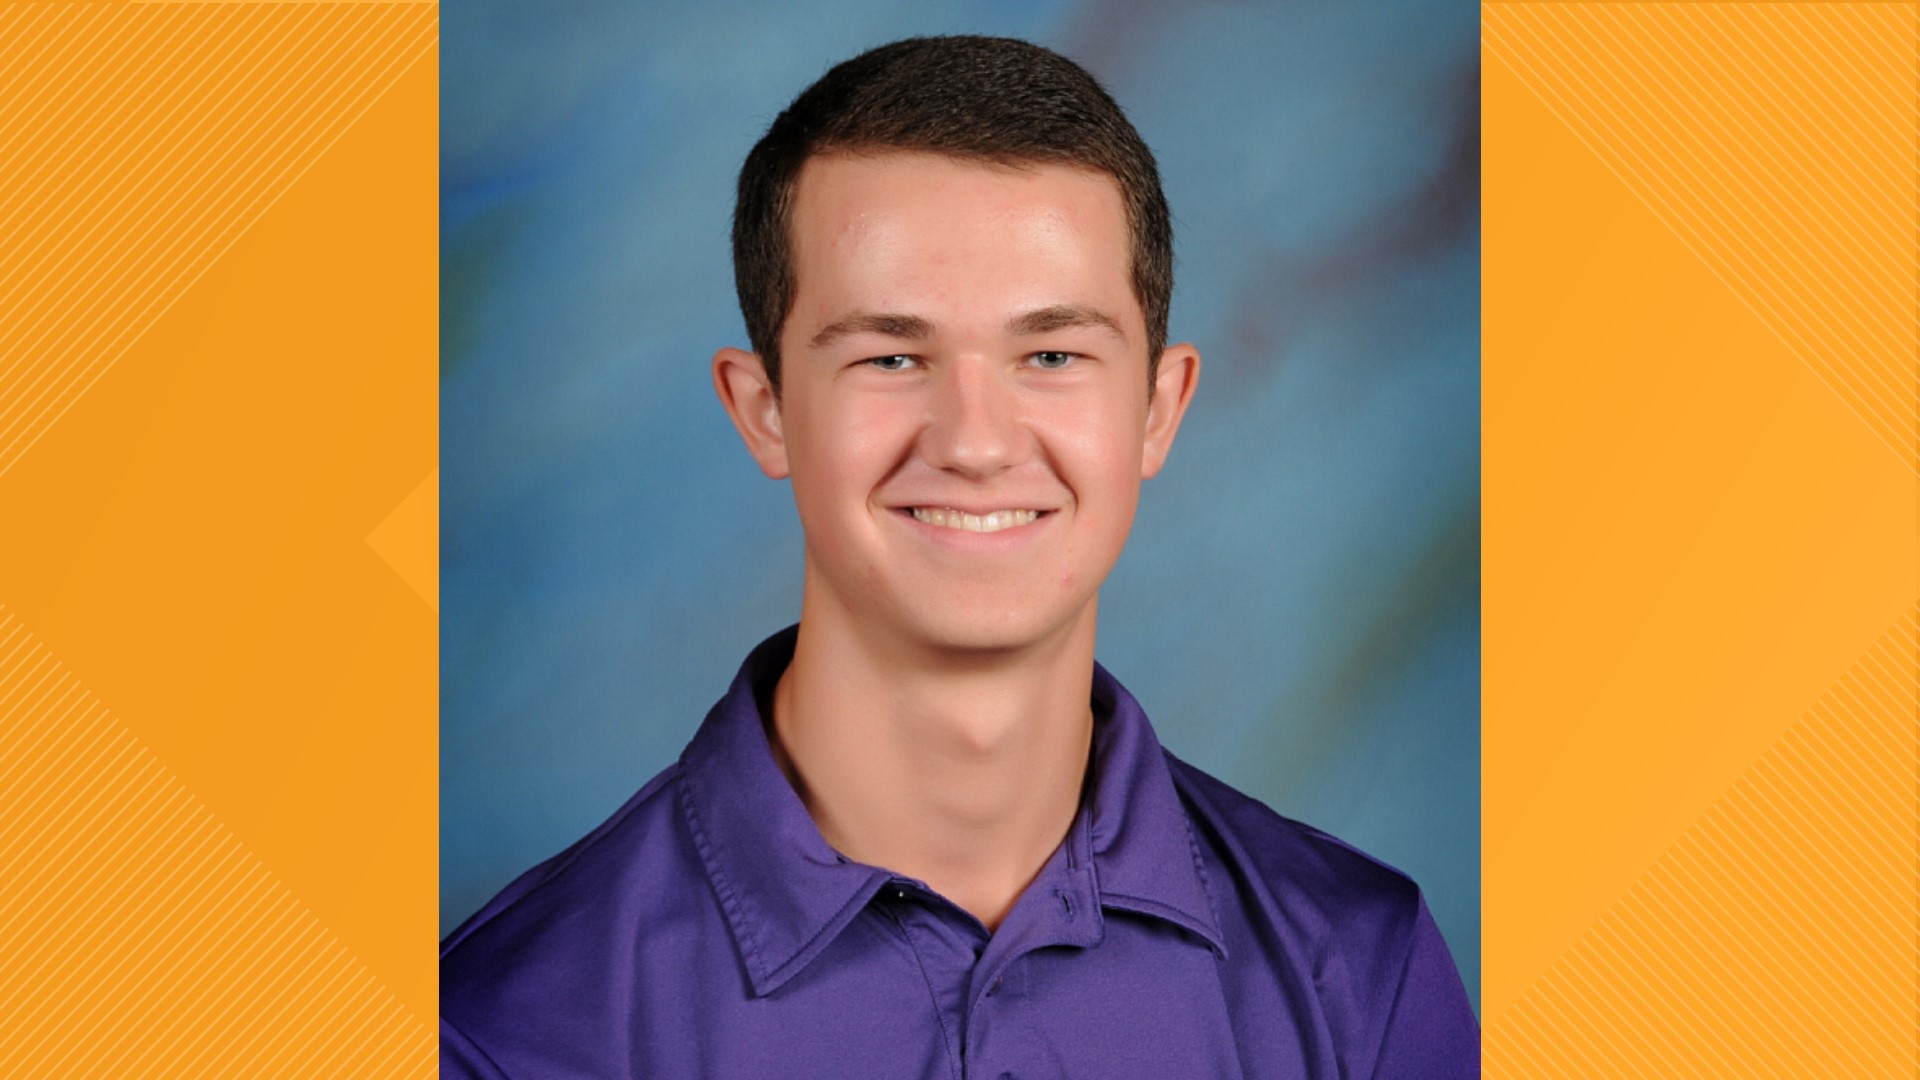 According to St. Joseph's High School in Conway, Ark., junior Caleb Mallett earned a perfect score on the ACT Test.